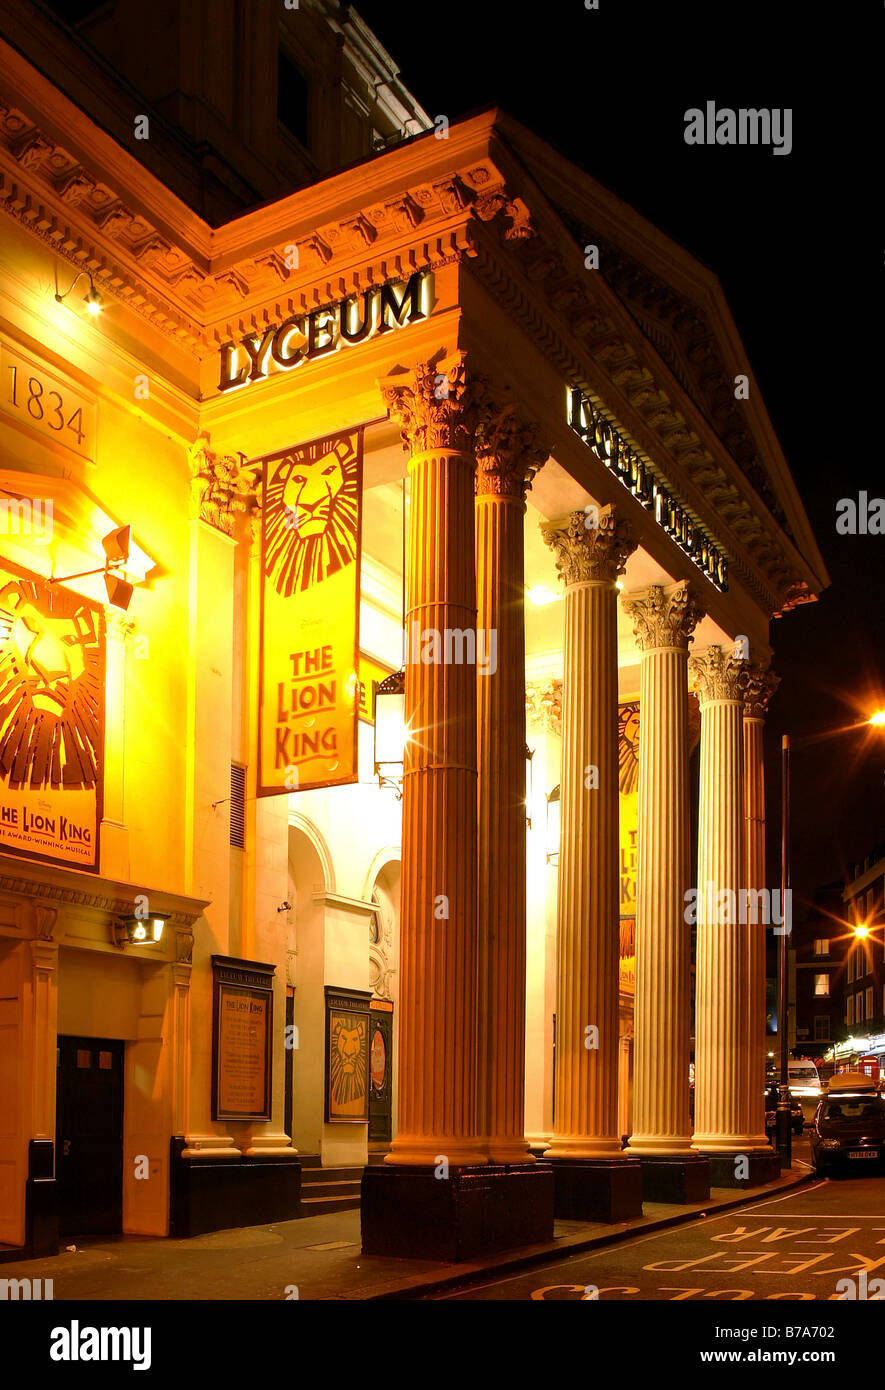 The Lyceum Theatre at night, London, England, Great Britain, Europe Stock Photo